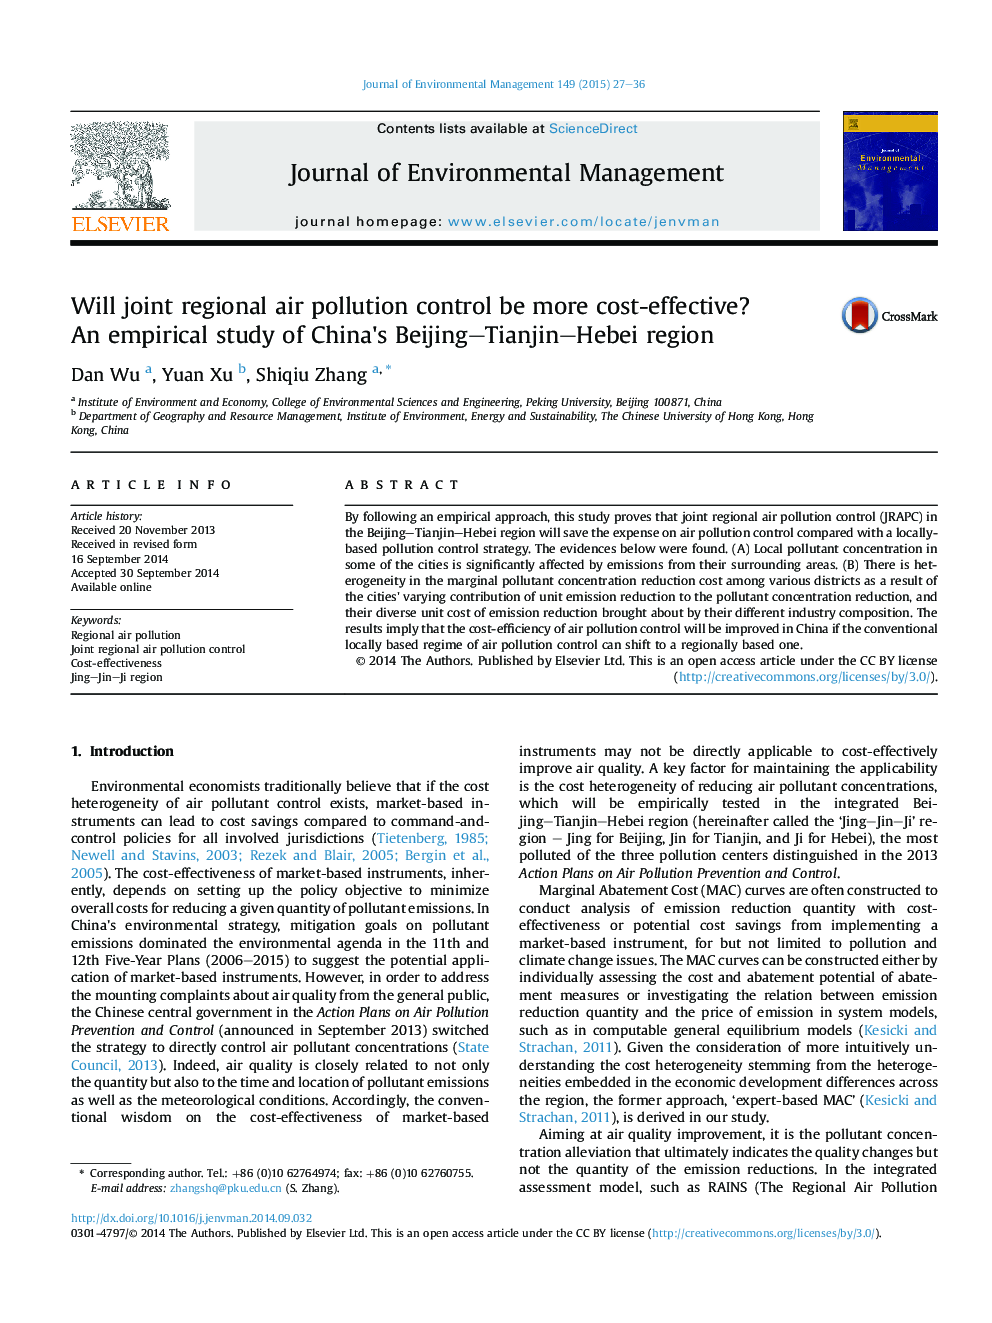 Will joint regional air pollution control be more cost-effective? AnÂ empirical study of China's Beijing-Tianjin-Hebei region